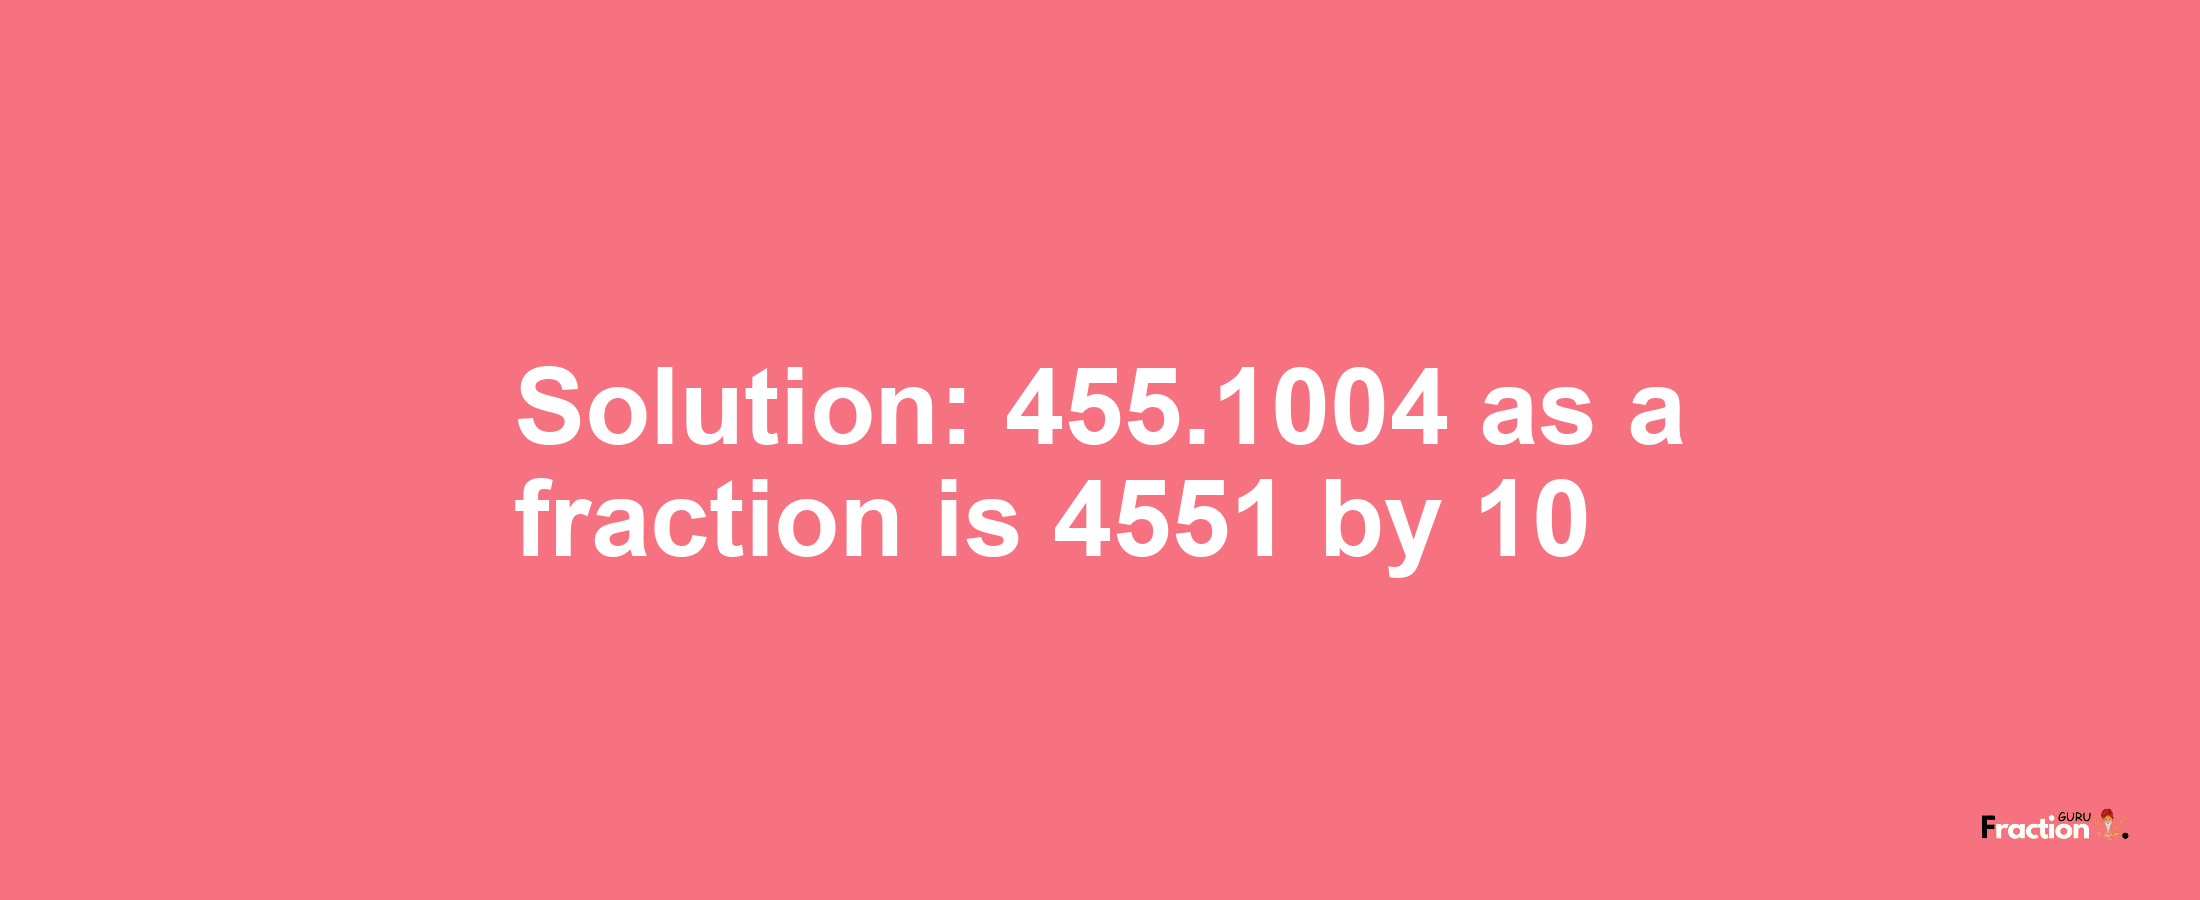 Solution:455.1004 as a fraction is 4551/10